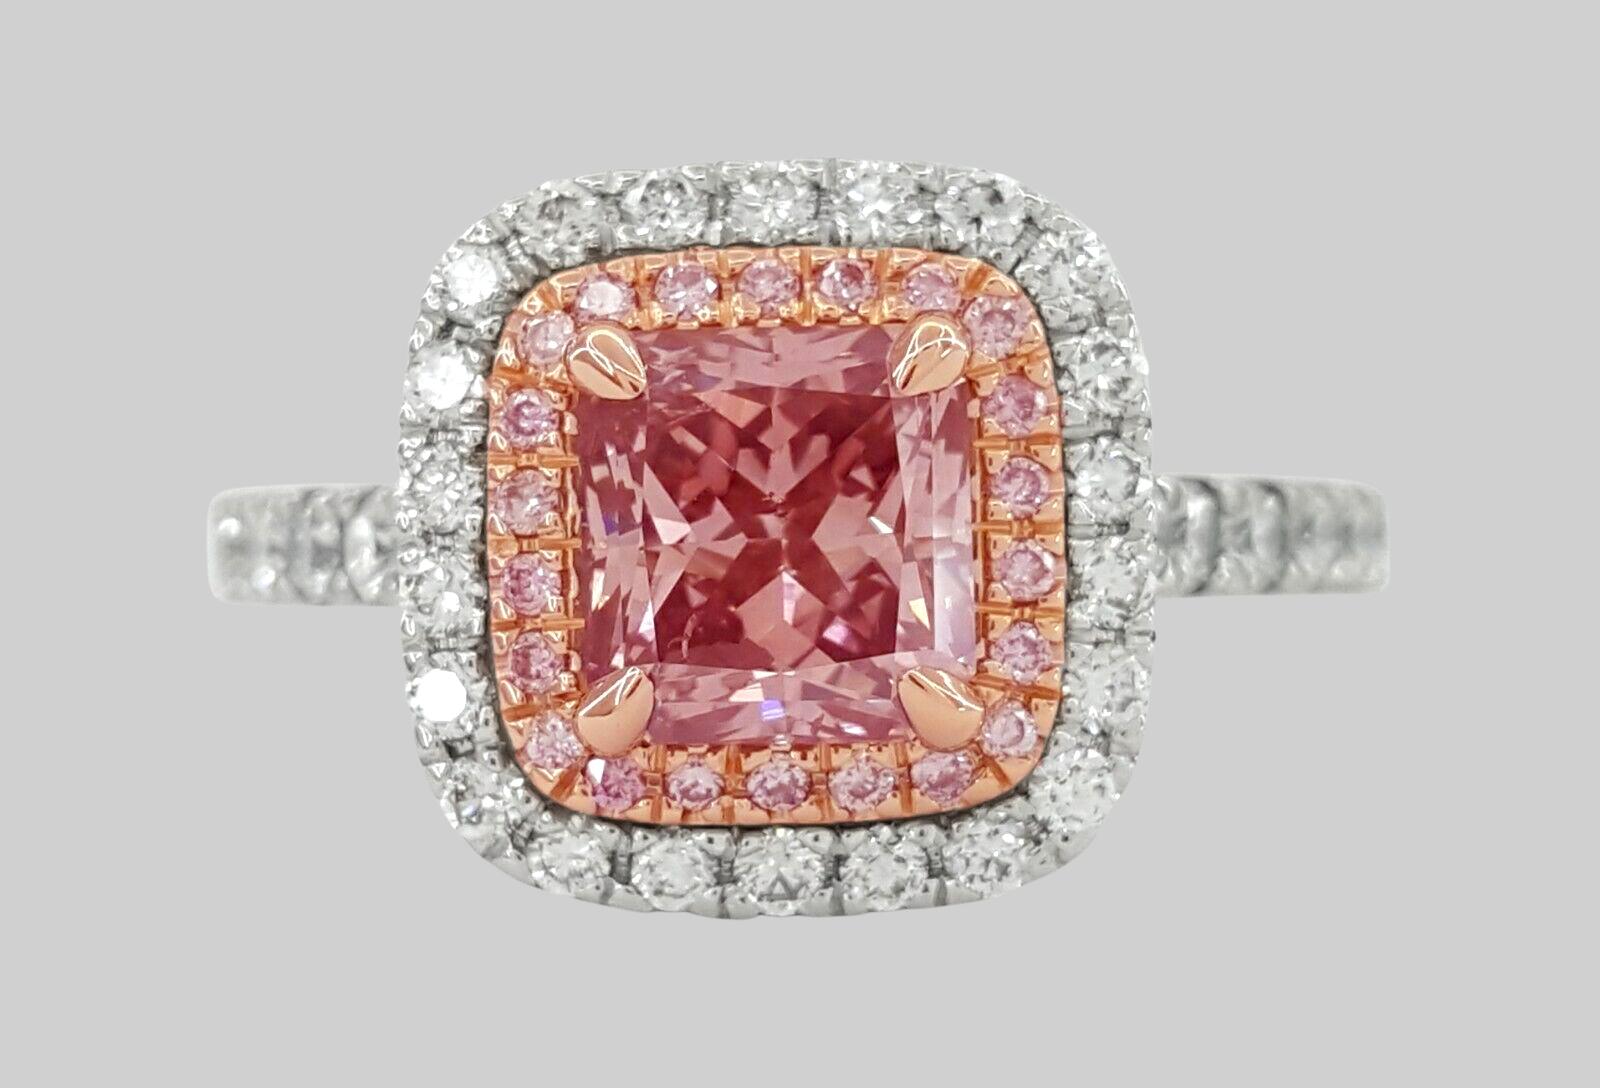 1.87 ct total weight Platinum 18K Rose Gold Radiant Cut Natural Fancy Orangy-Pink Diamond Double Halo Engagement Ring. 
The ring weighs 6.2 grams, size 6, the center stone is a 1.23 ct Natural Radiant Cut, Fancy Orangy-Pink (the diamond main color